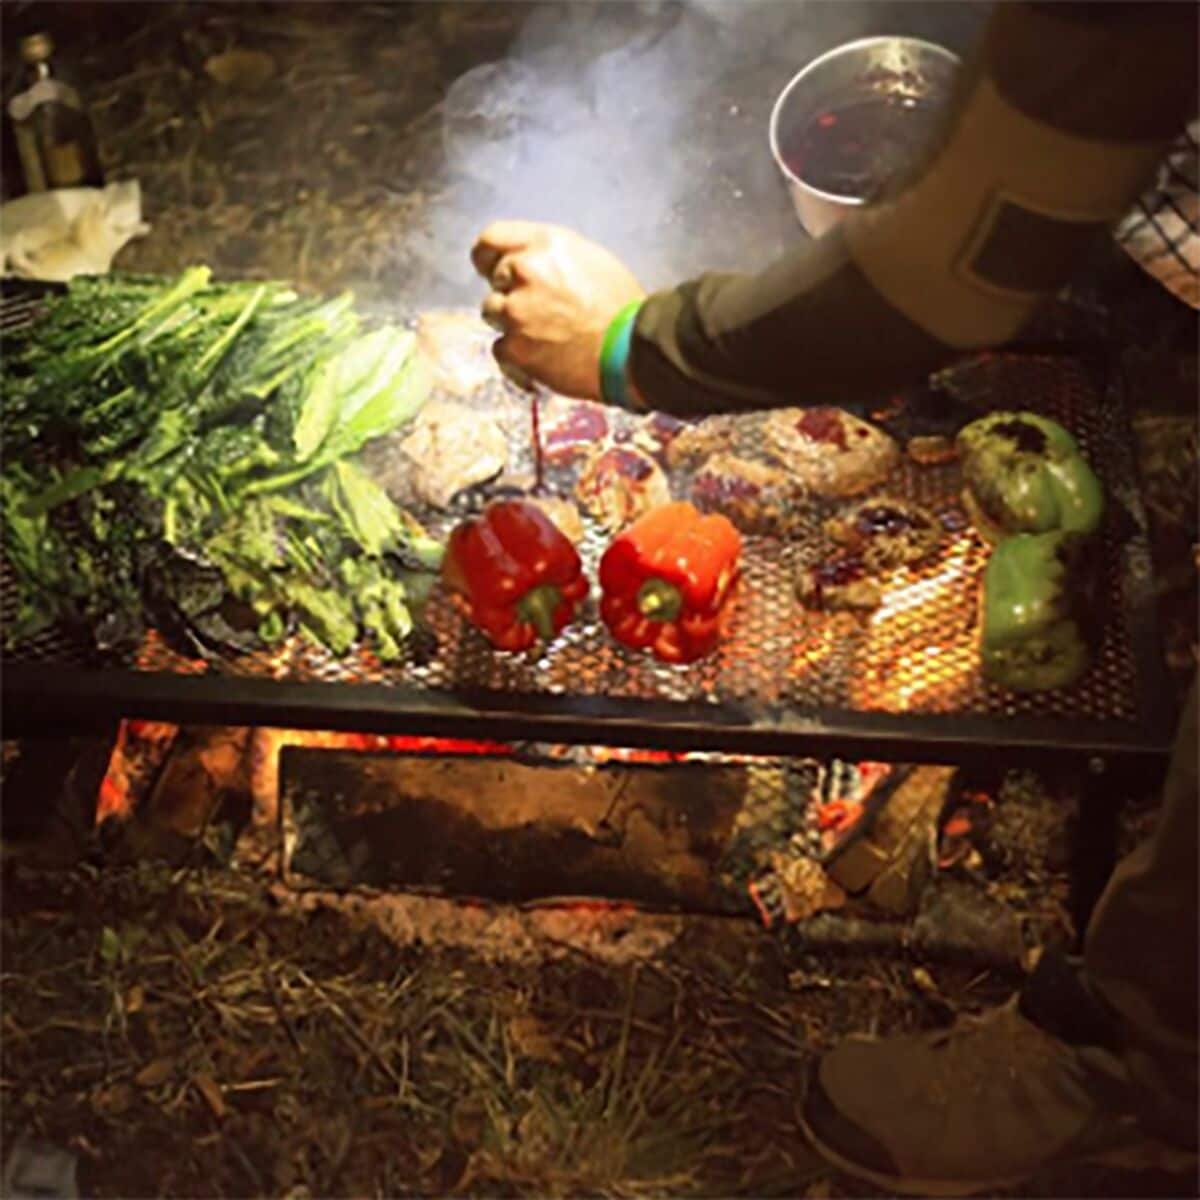  Camp Chef Lumberjack Over Fire Grill - Hike & Camp